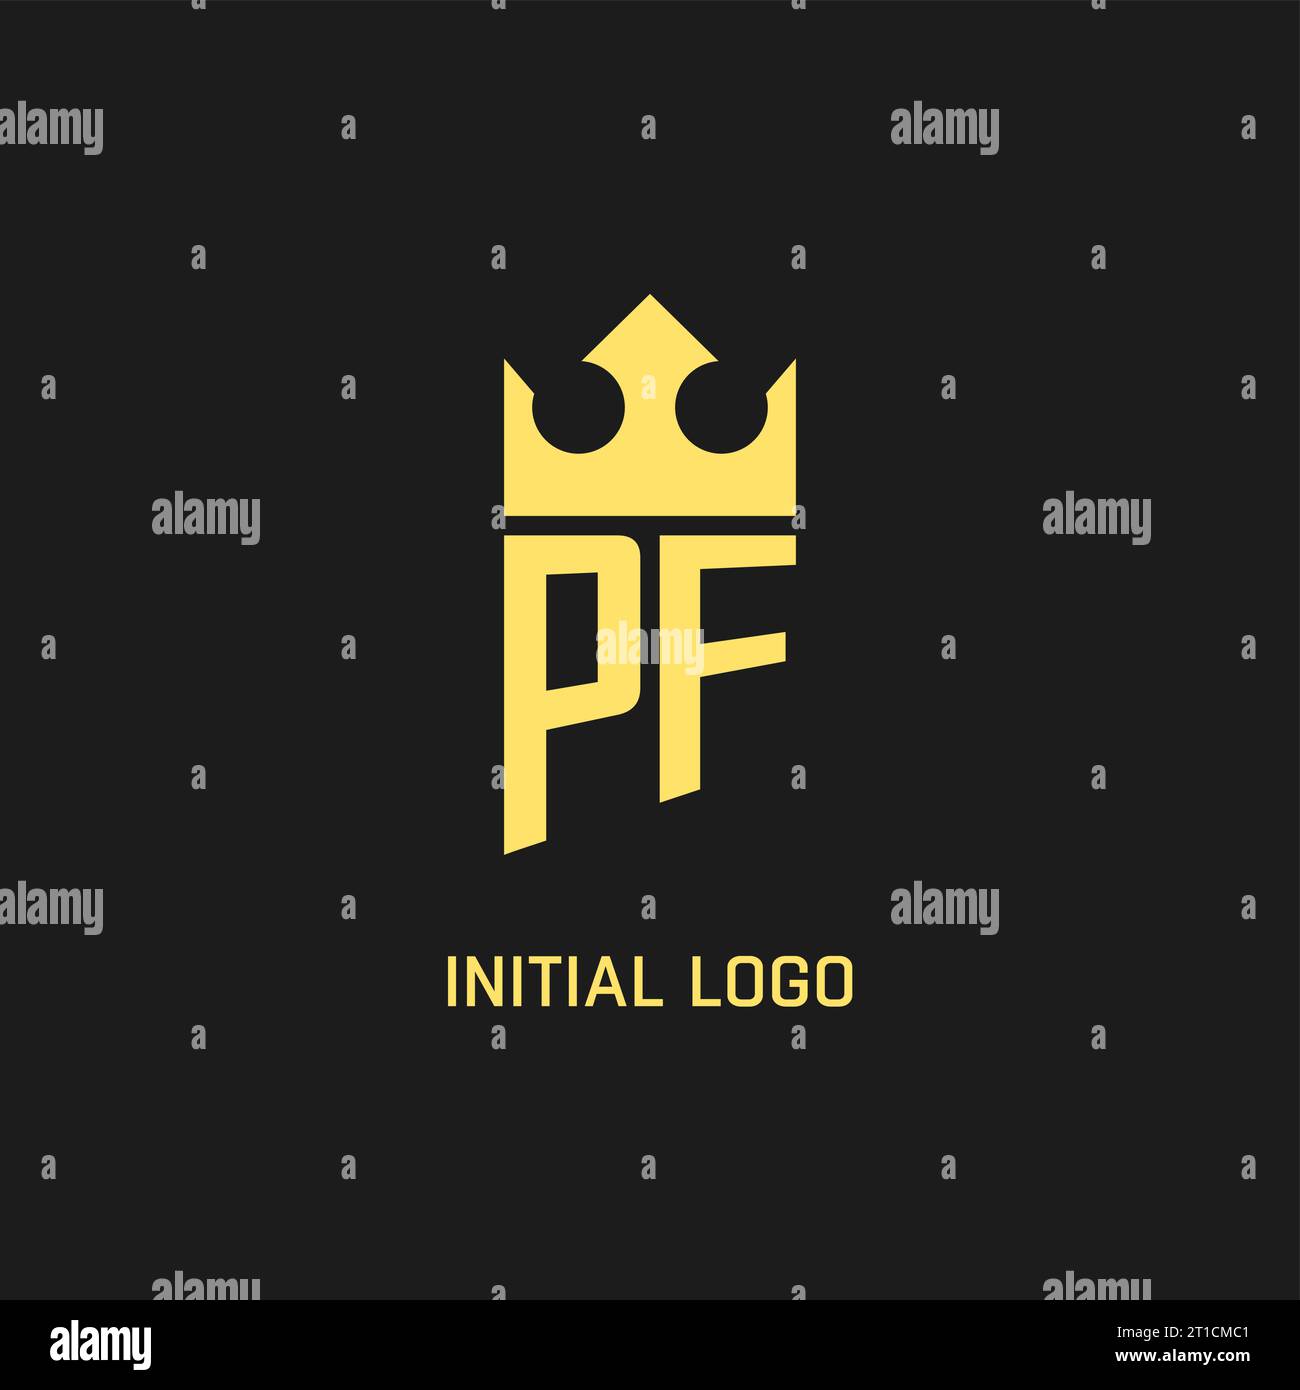 Monogram PF logo shield crown shape, elegant and luxury initial logo style vector graphic Stock Vector